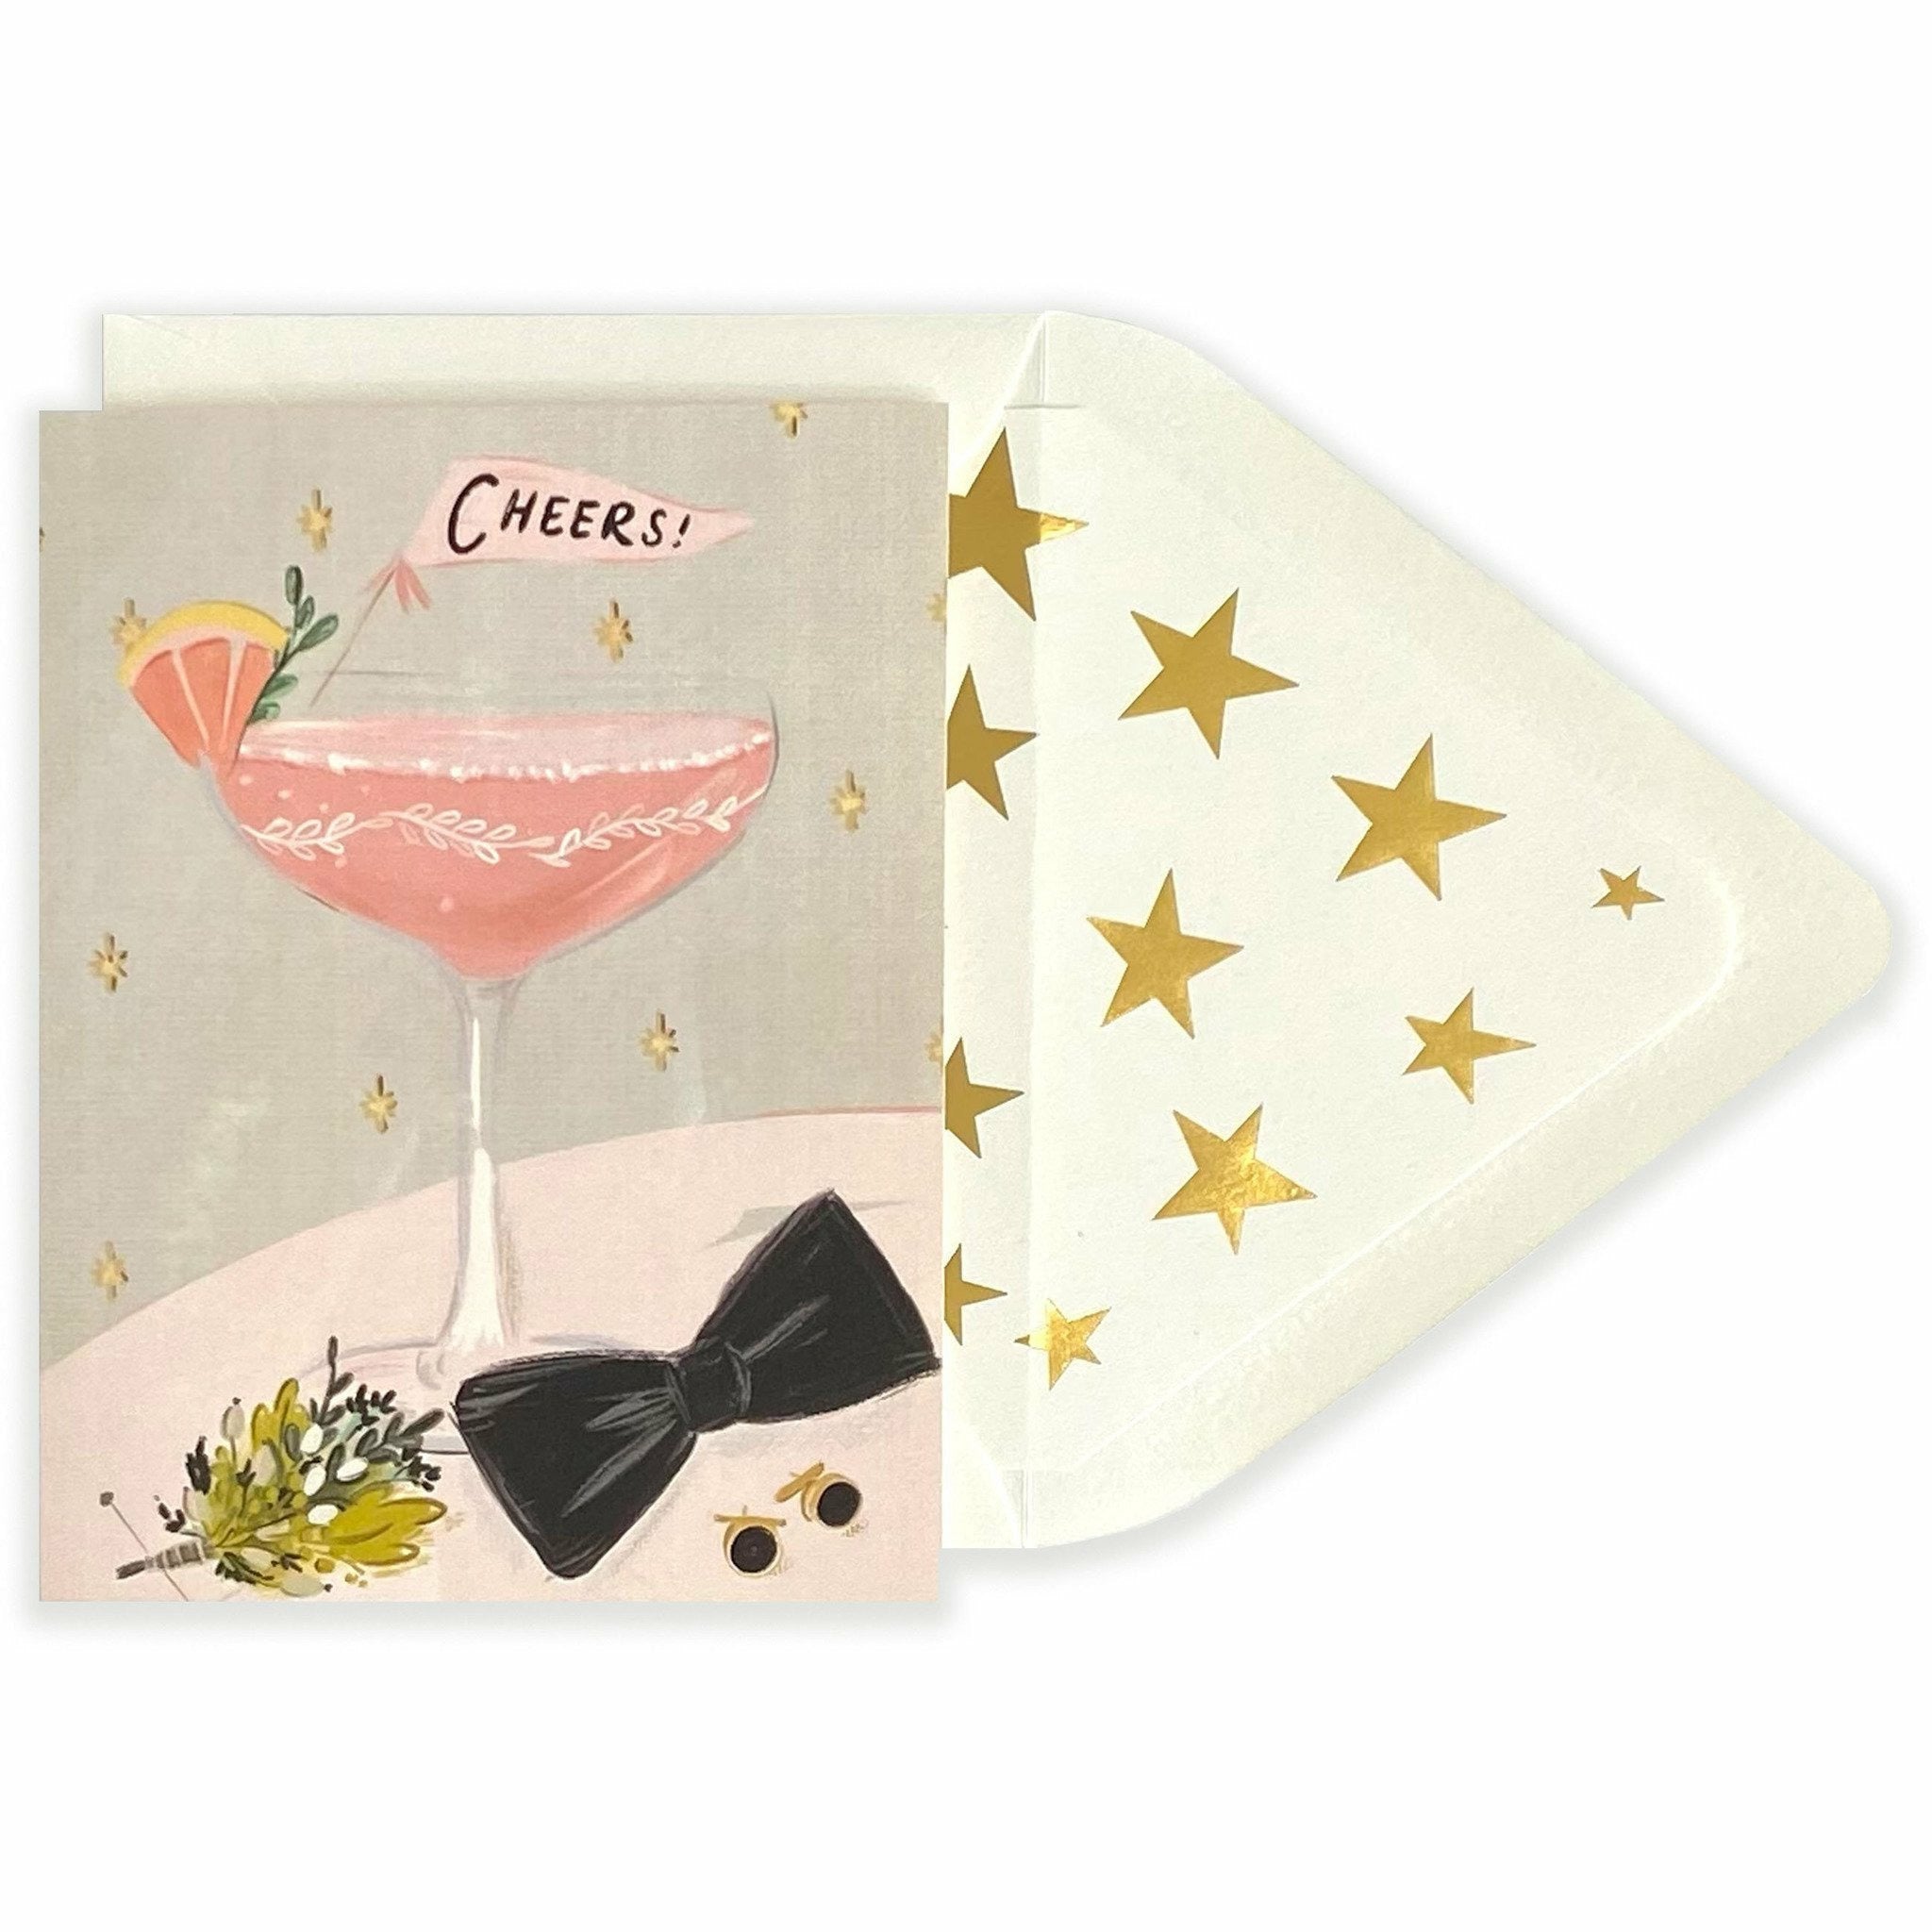 Cheers ! Cocktail Card - The First Snow